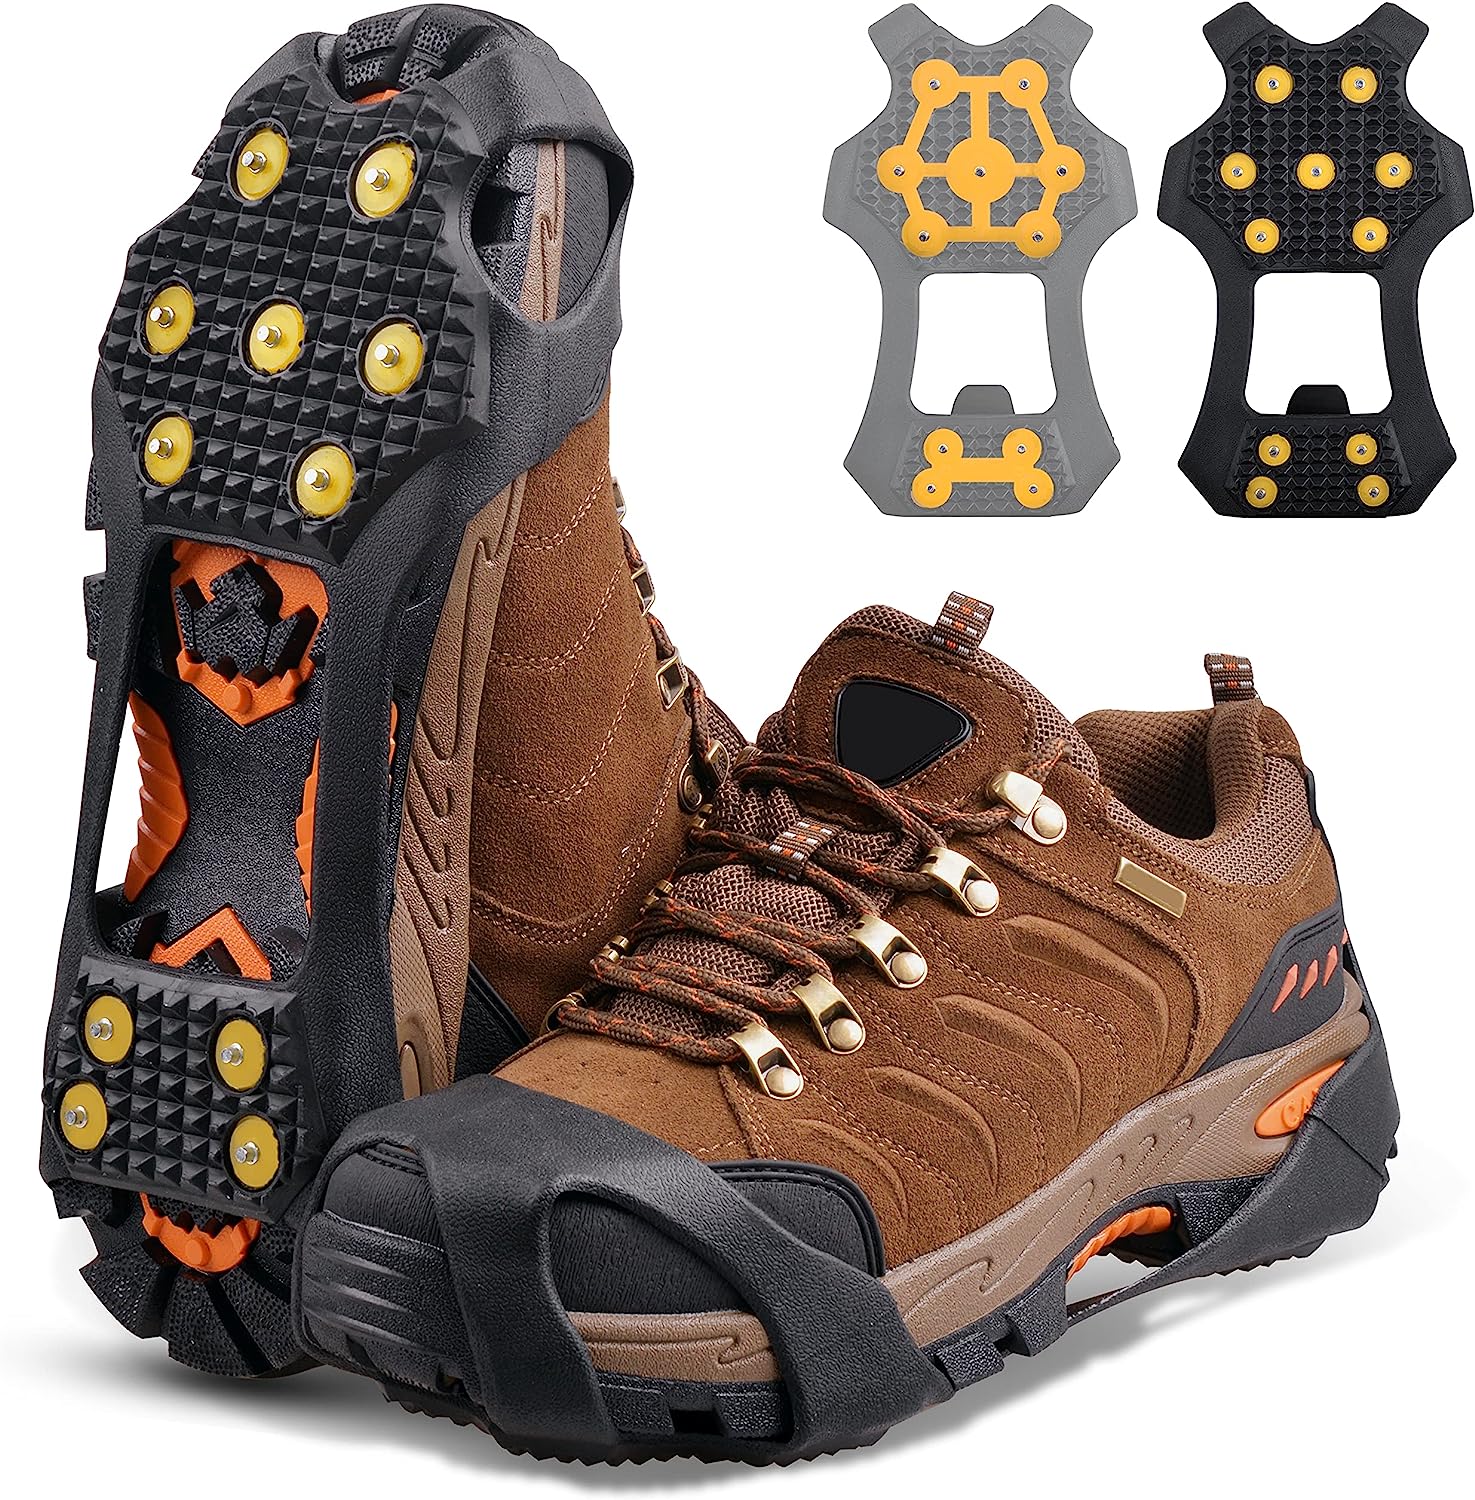 Ice Snow Cleats for Shoes and Boots,Walk Traction [...]